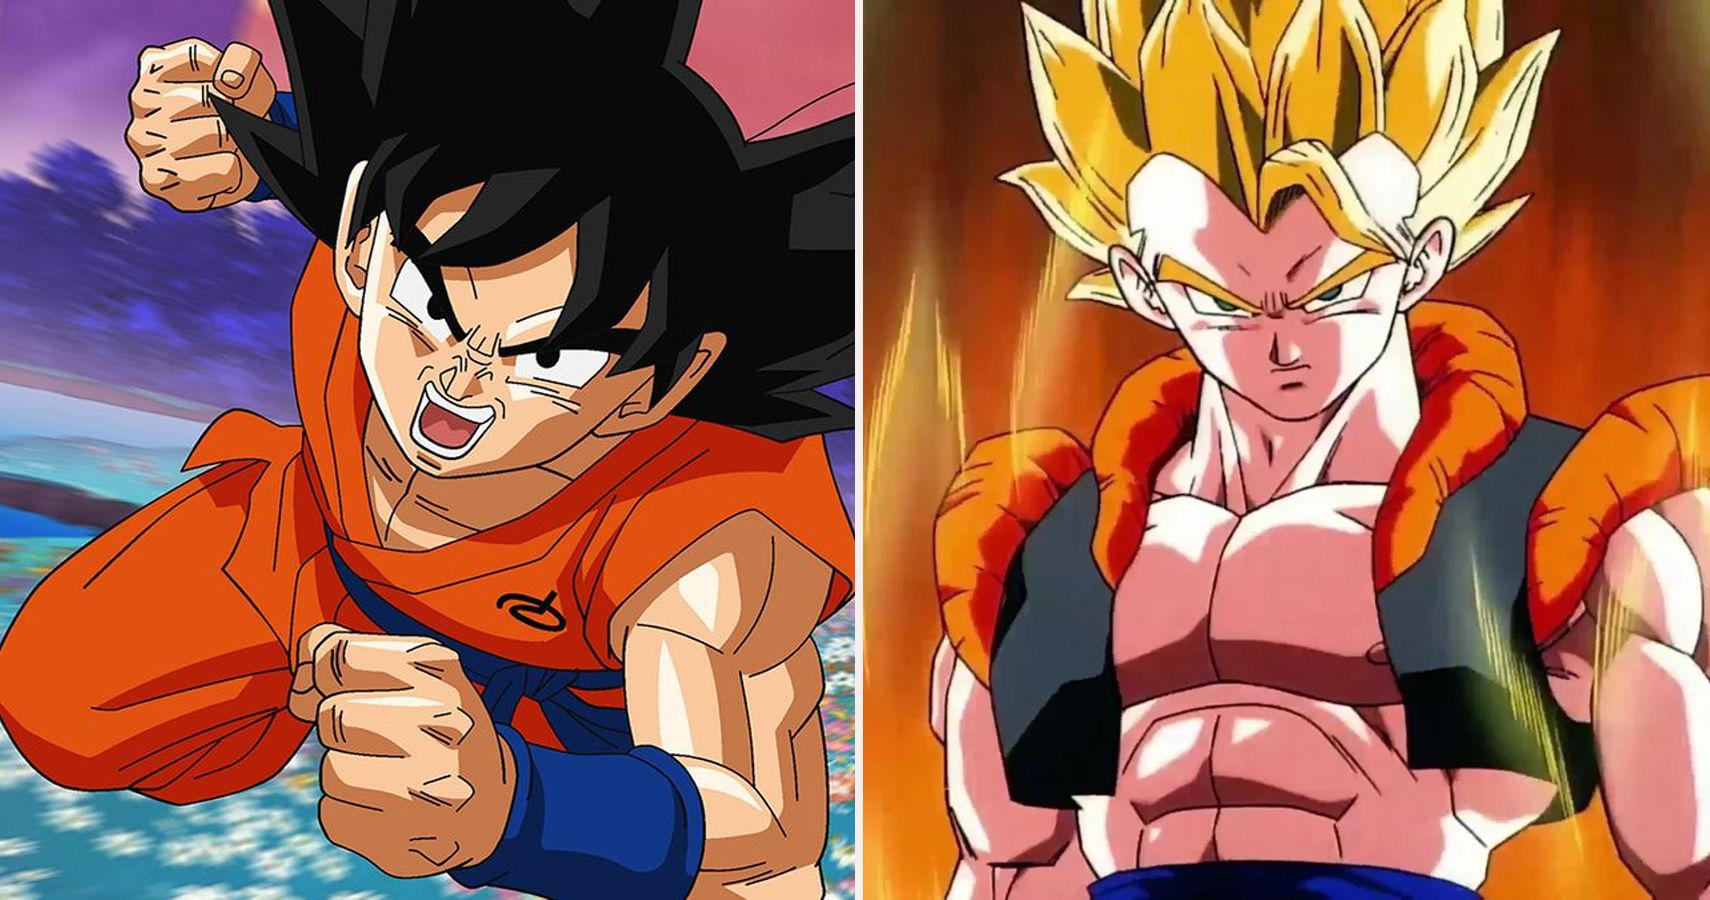 5 Things Dragon Ball Super Does Better Than Dbz Vice Versa Since battle of the gods, gokuu has undergone new forms from super saiyan god to super saiyan blue to other evolved forms that have gone up against many in. 5 things dragon ball super does better